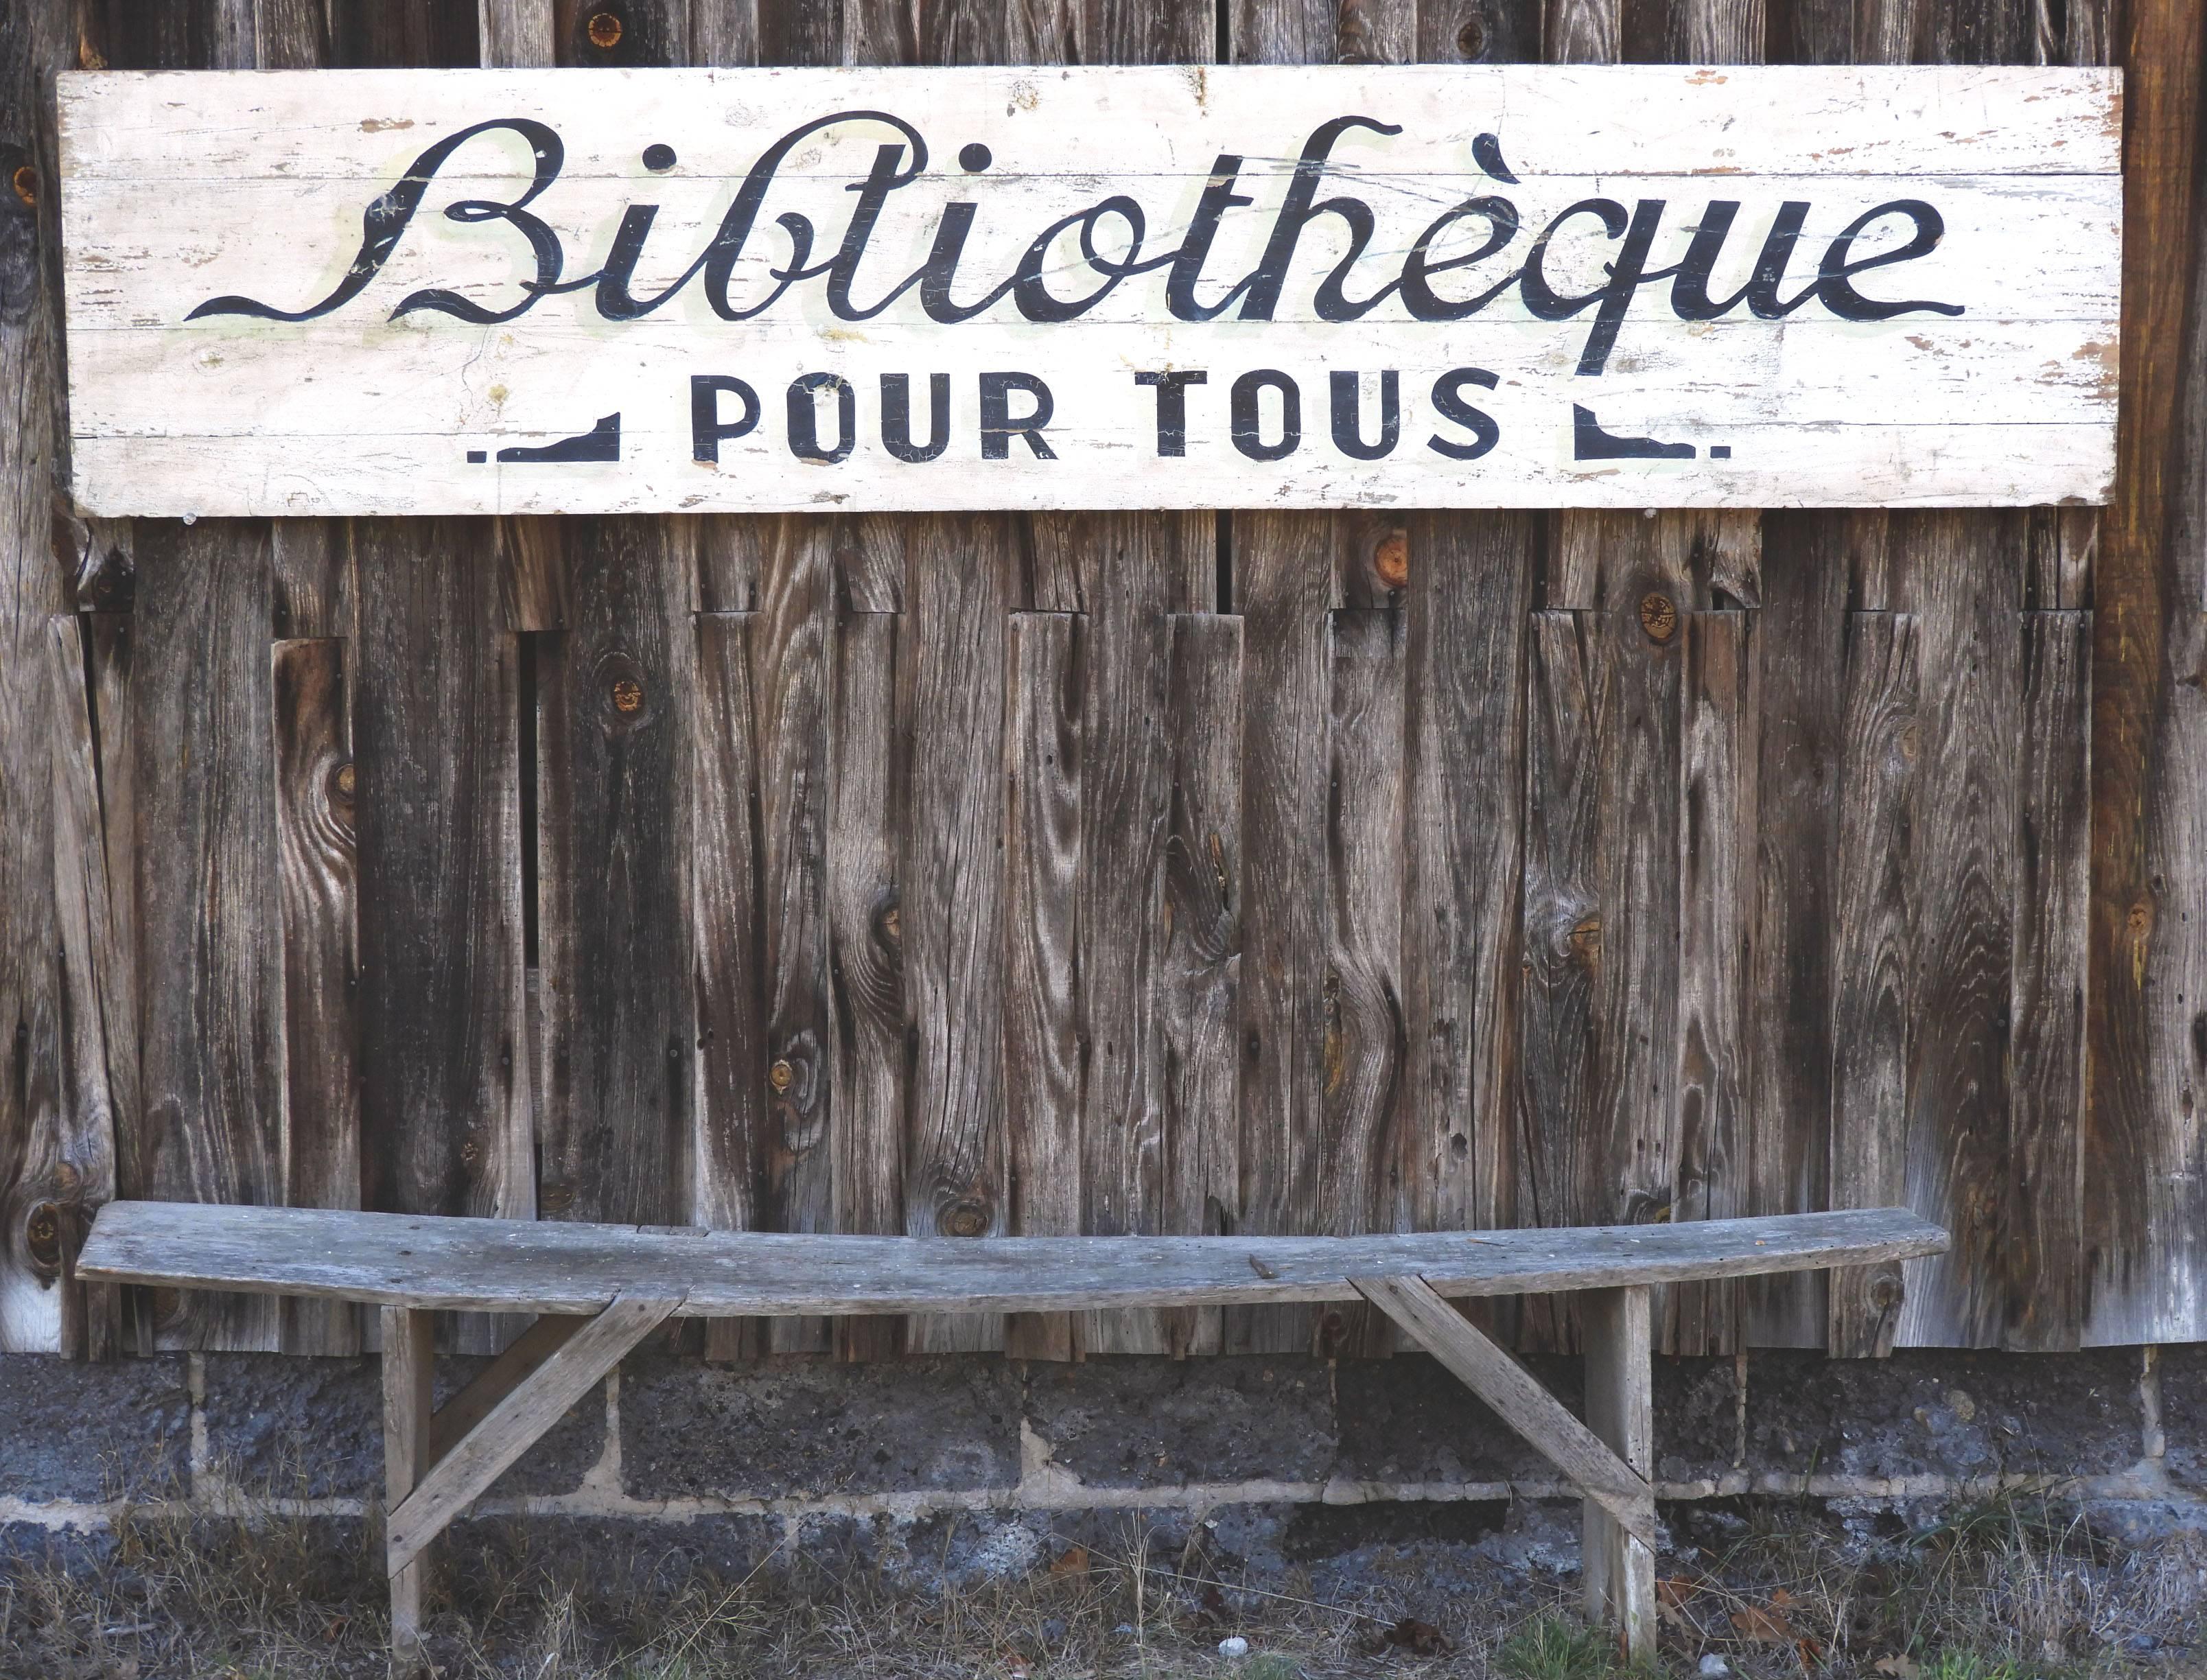 French Folk Art library sign painted wood boards biblioteque pour tous.
All original late 19th century, French Biblioteque library sign.
Hand-painted on timber planks circa 1890-1910.
Great patina gloriously fatigued and distressed through age.